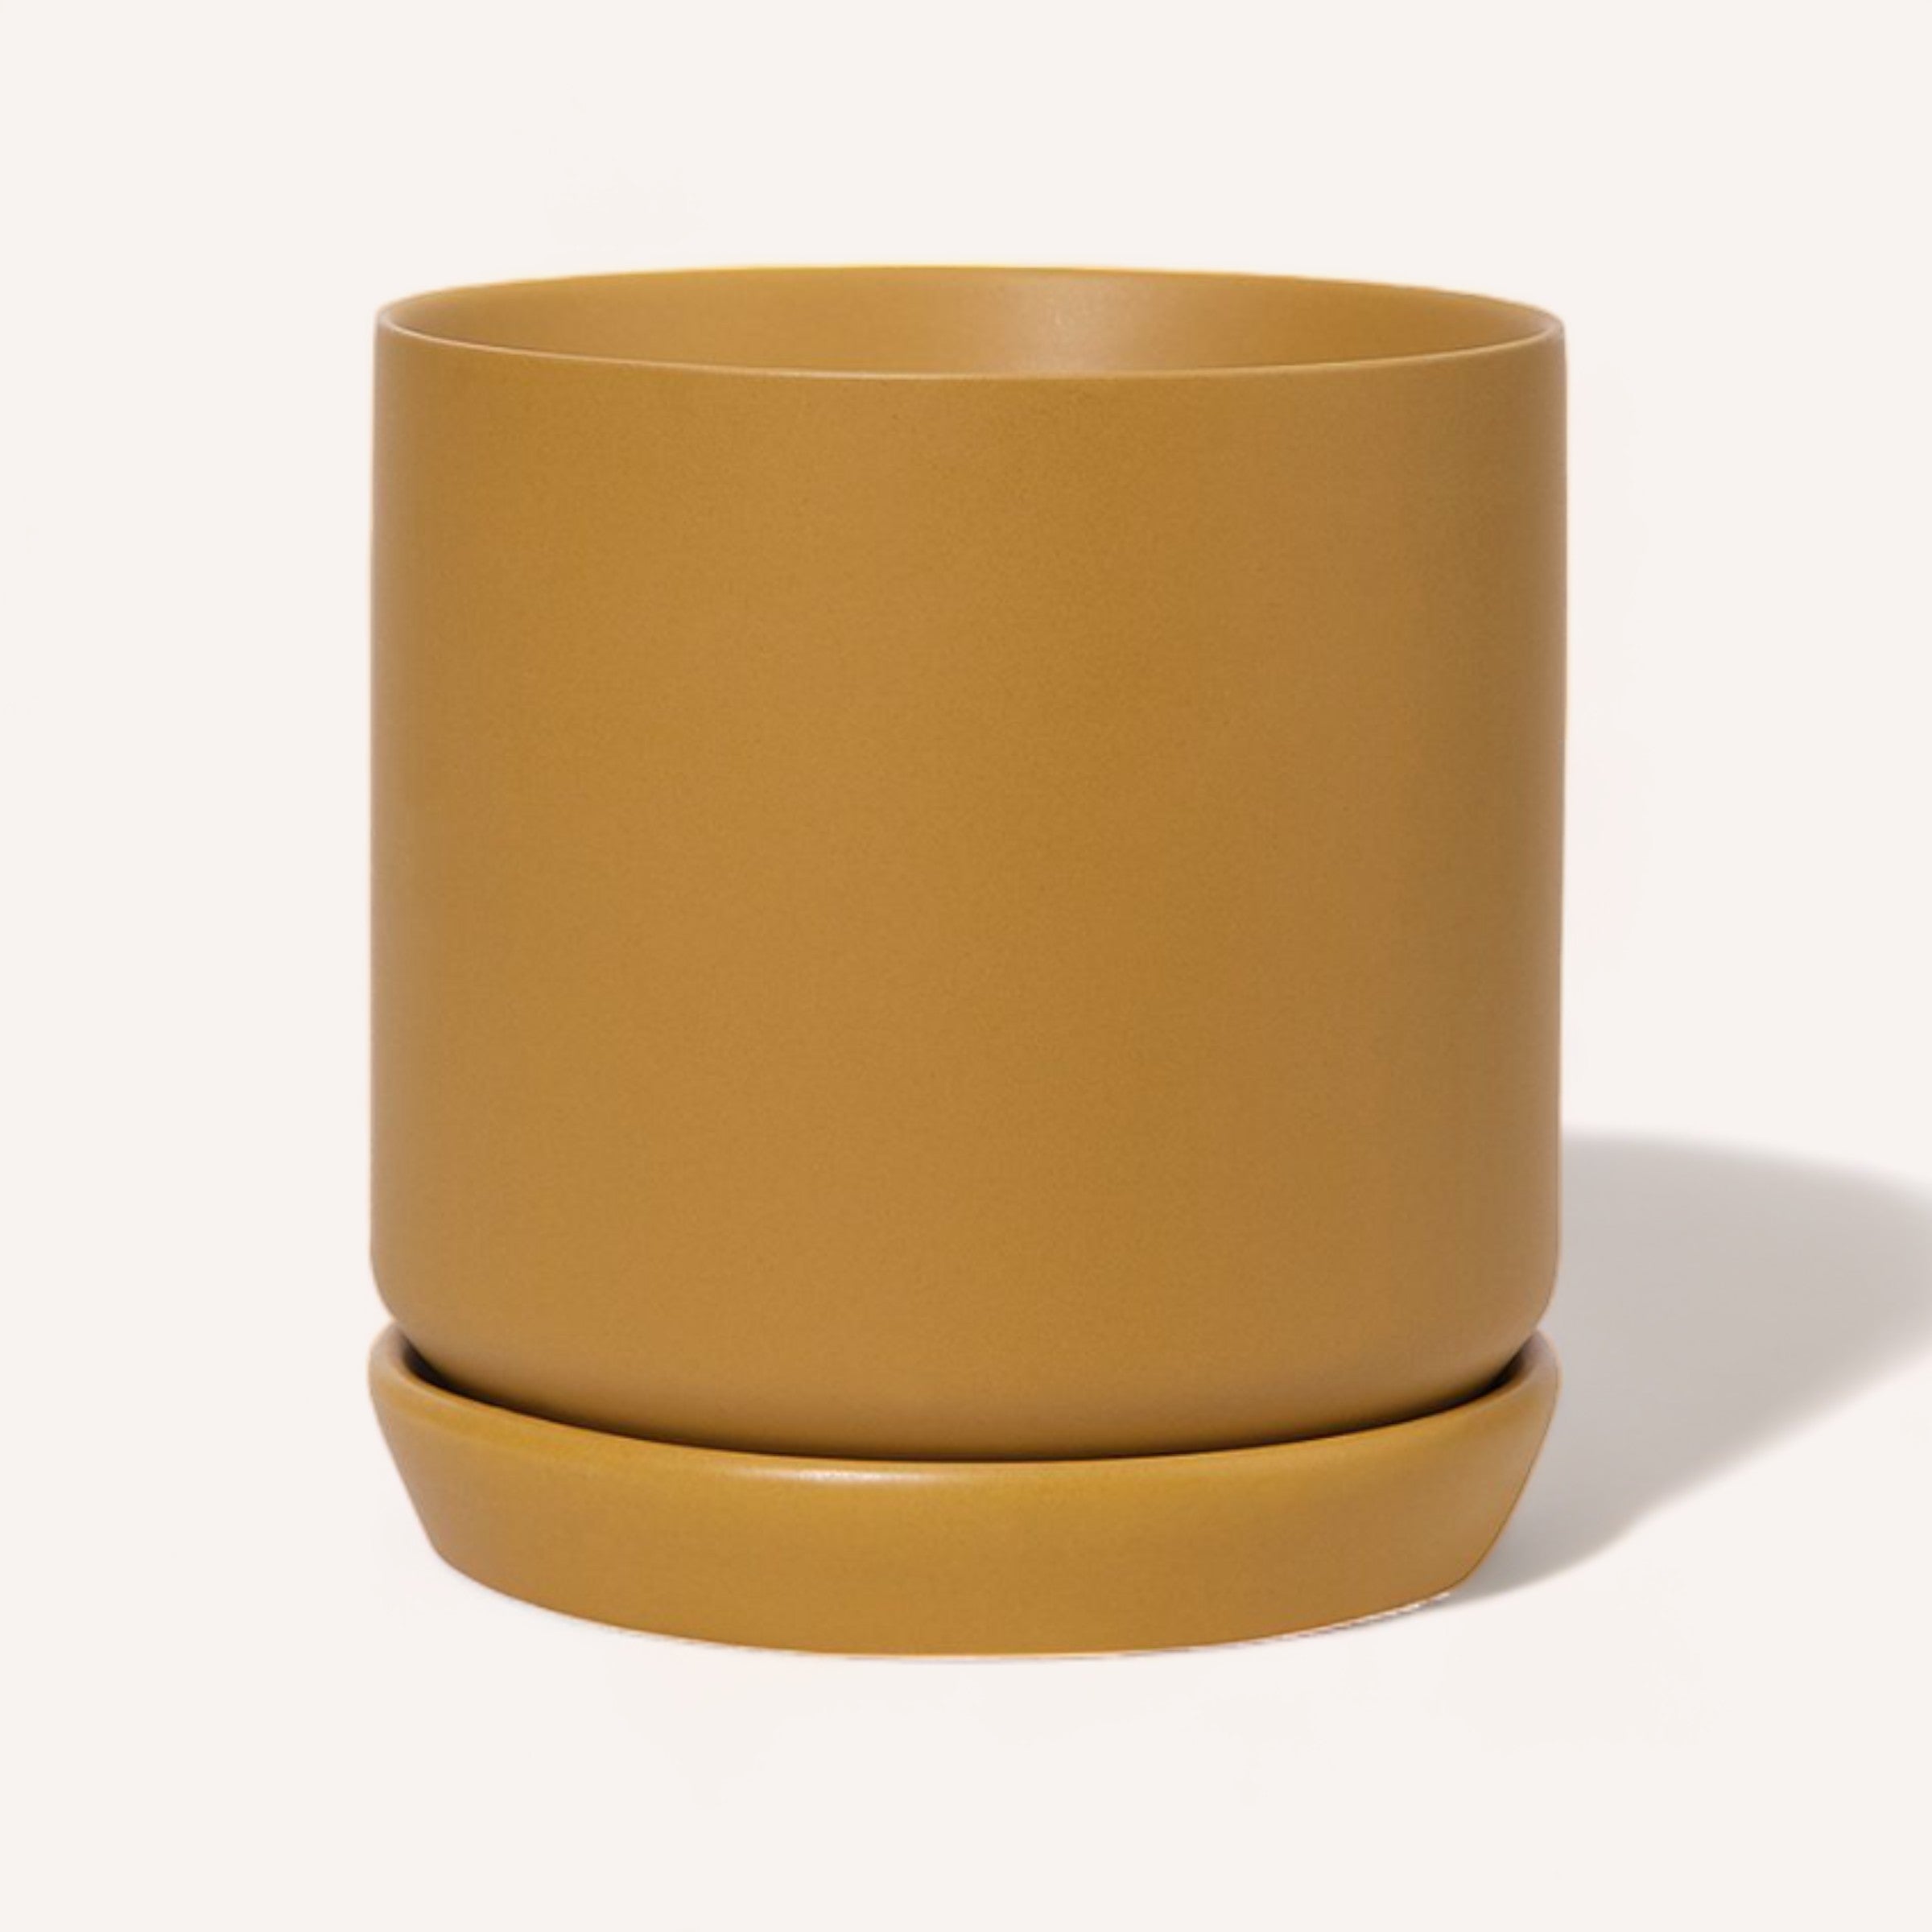 A simple yet elegant Oslo Planter by PottedNZ in mustard color stoneware with a matching saucer, isolated on a white background.